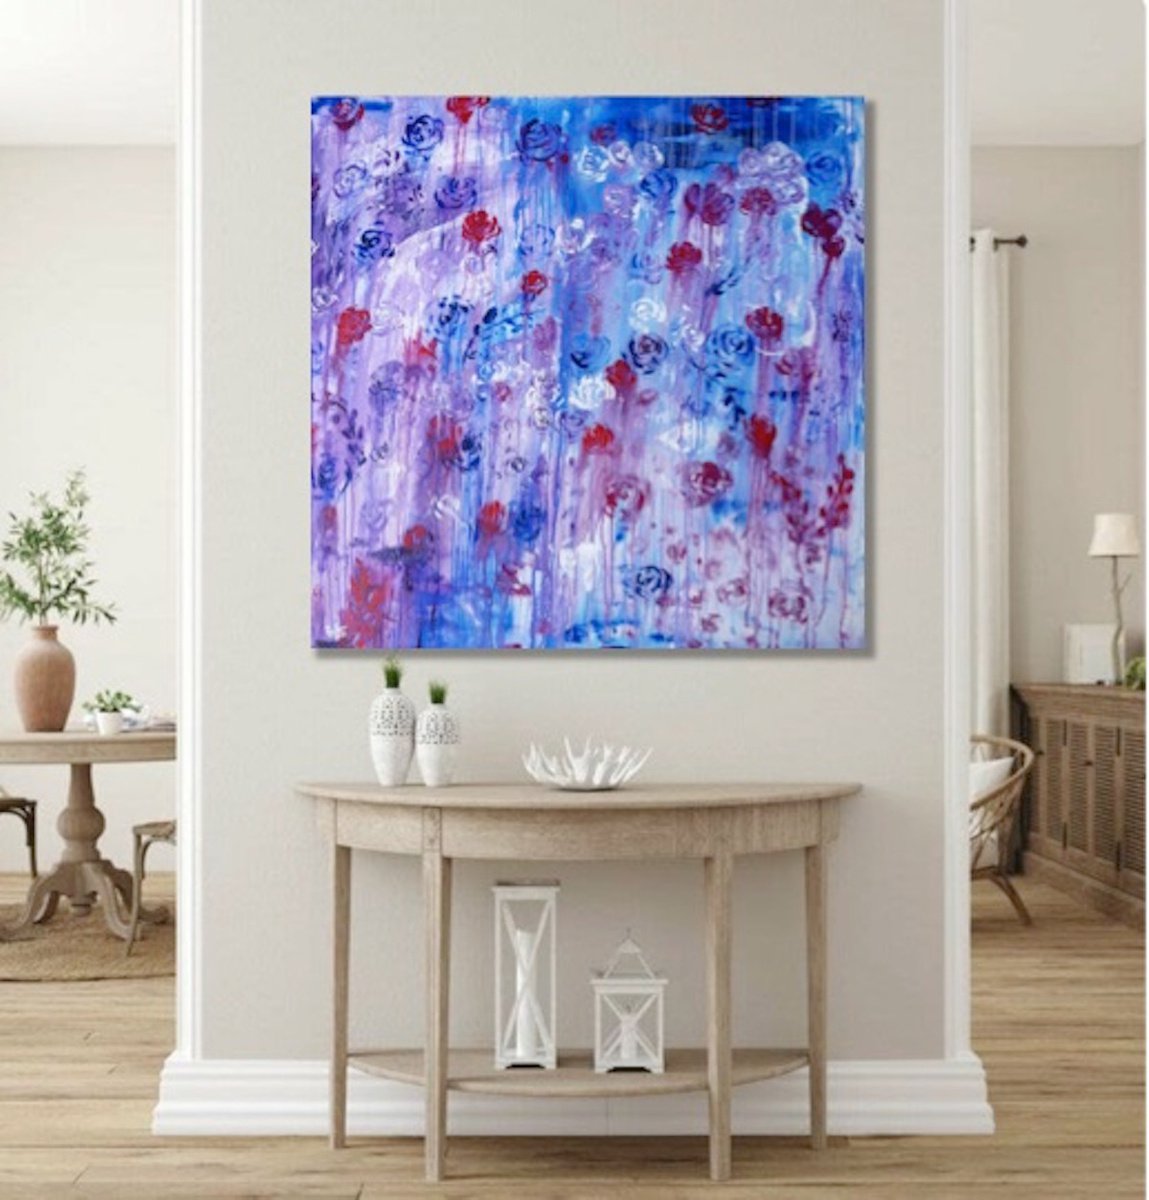 40x40 (100x100cm), The touch of blue roses, Original Abstract Blue Red Art, Blue, Red, W... by Elena Parau